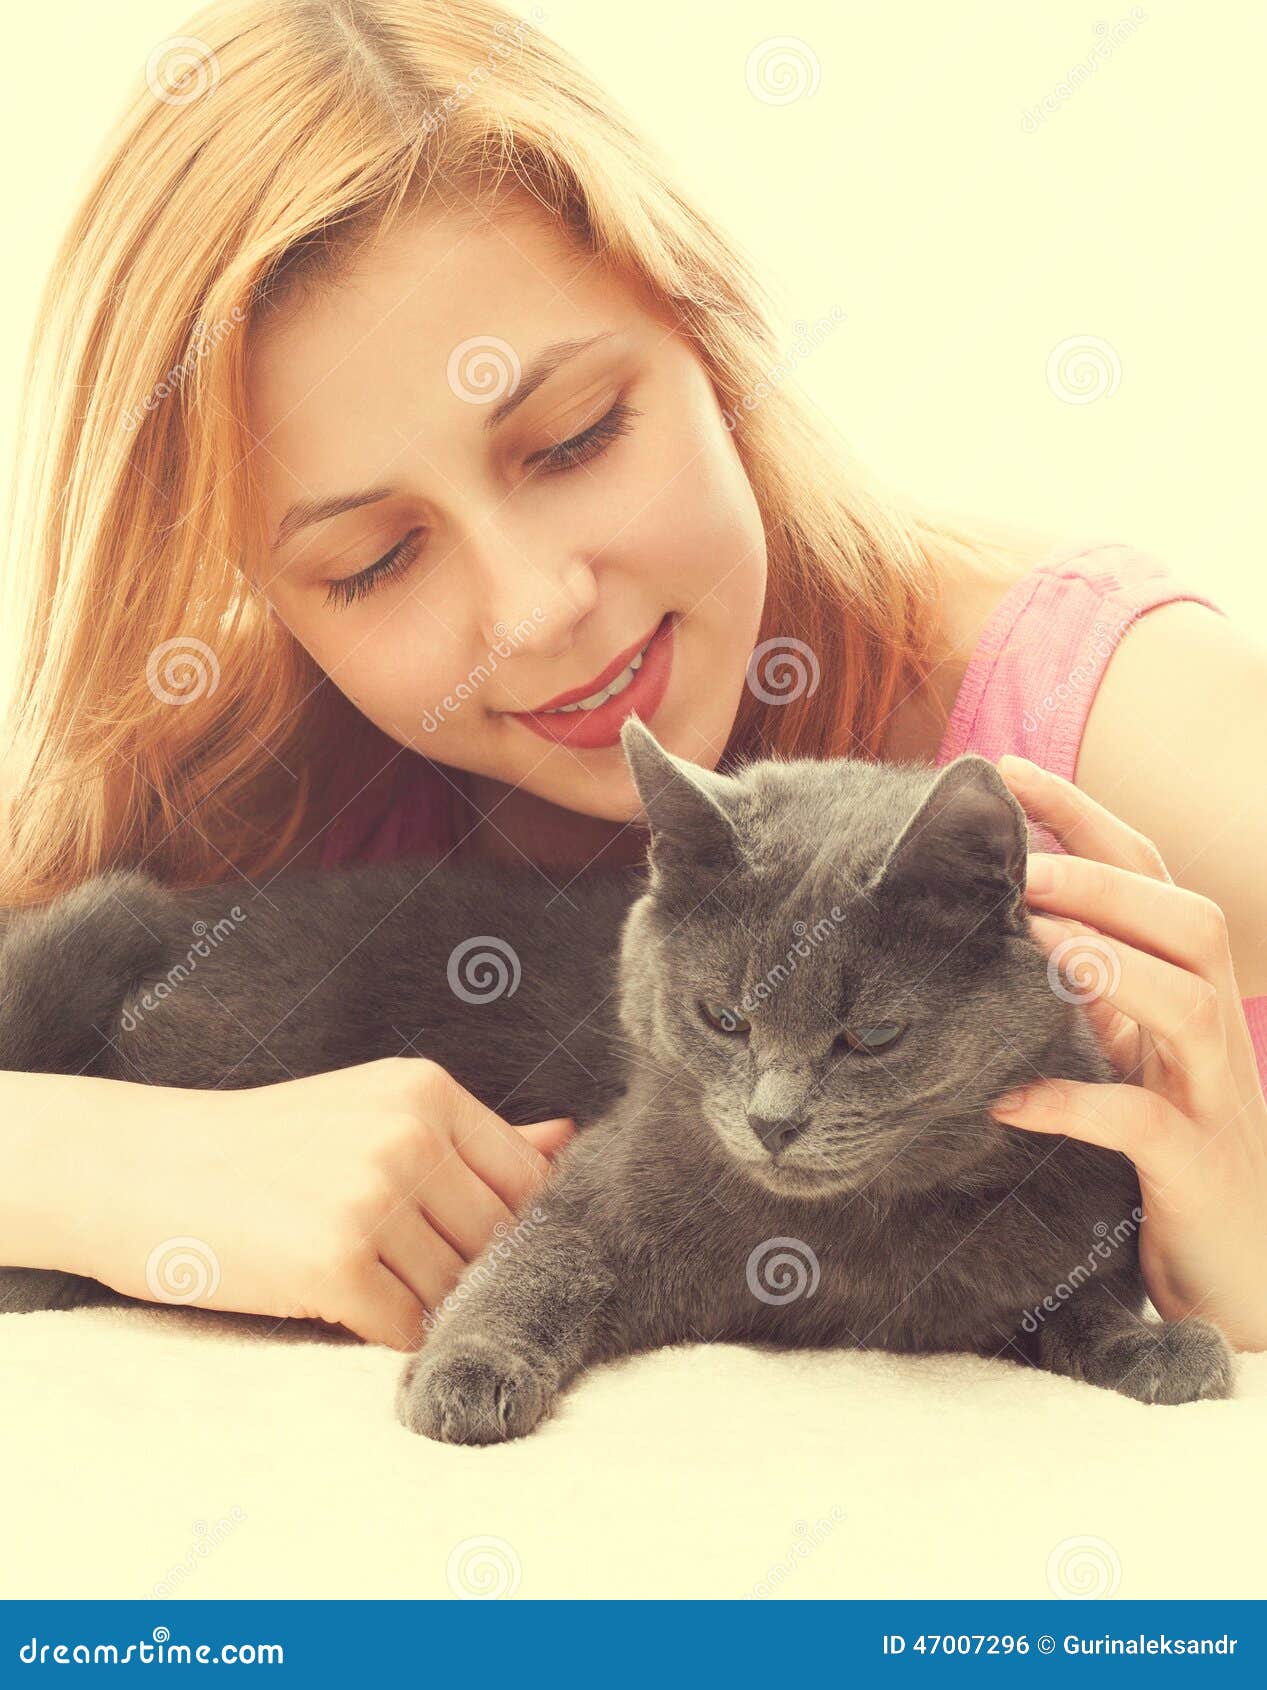 Girl And Gray Cat Stock Photo - Image: 47007296